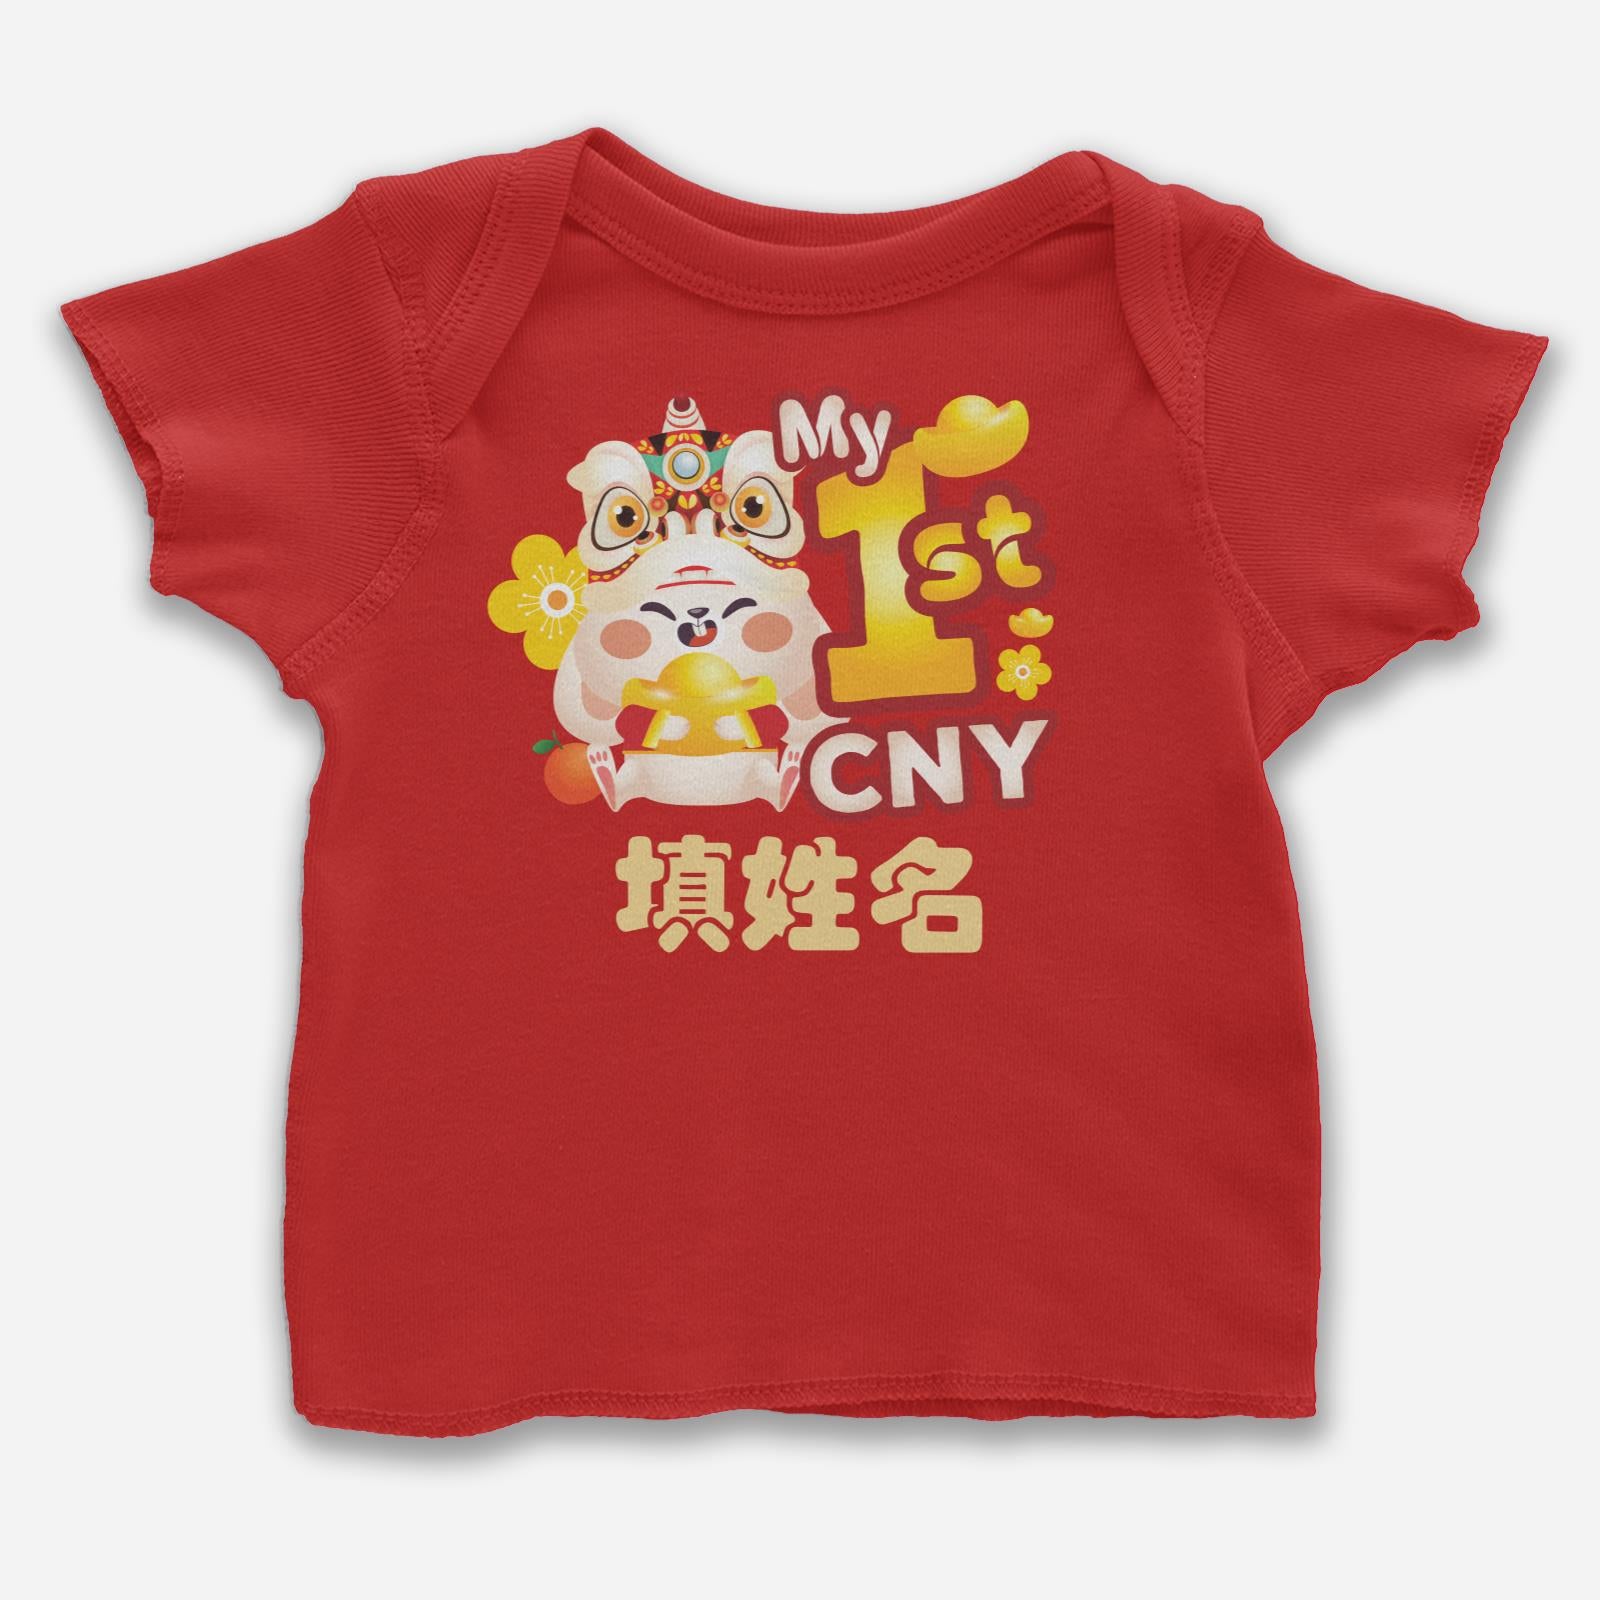 Cny Rabbit Family - My First Cny Baby Tee Shirt With Chinese Personalization